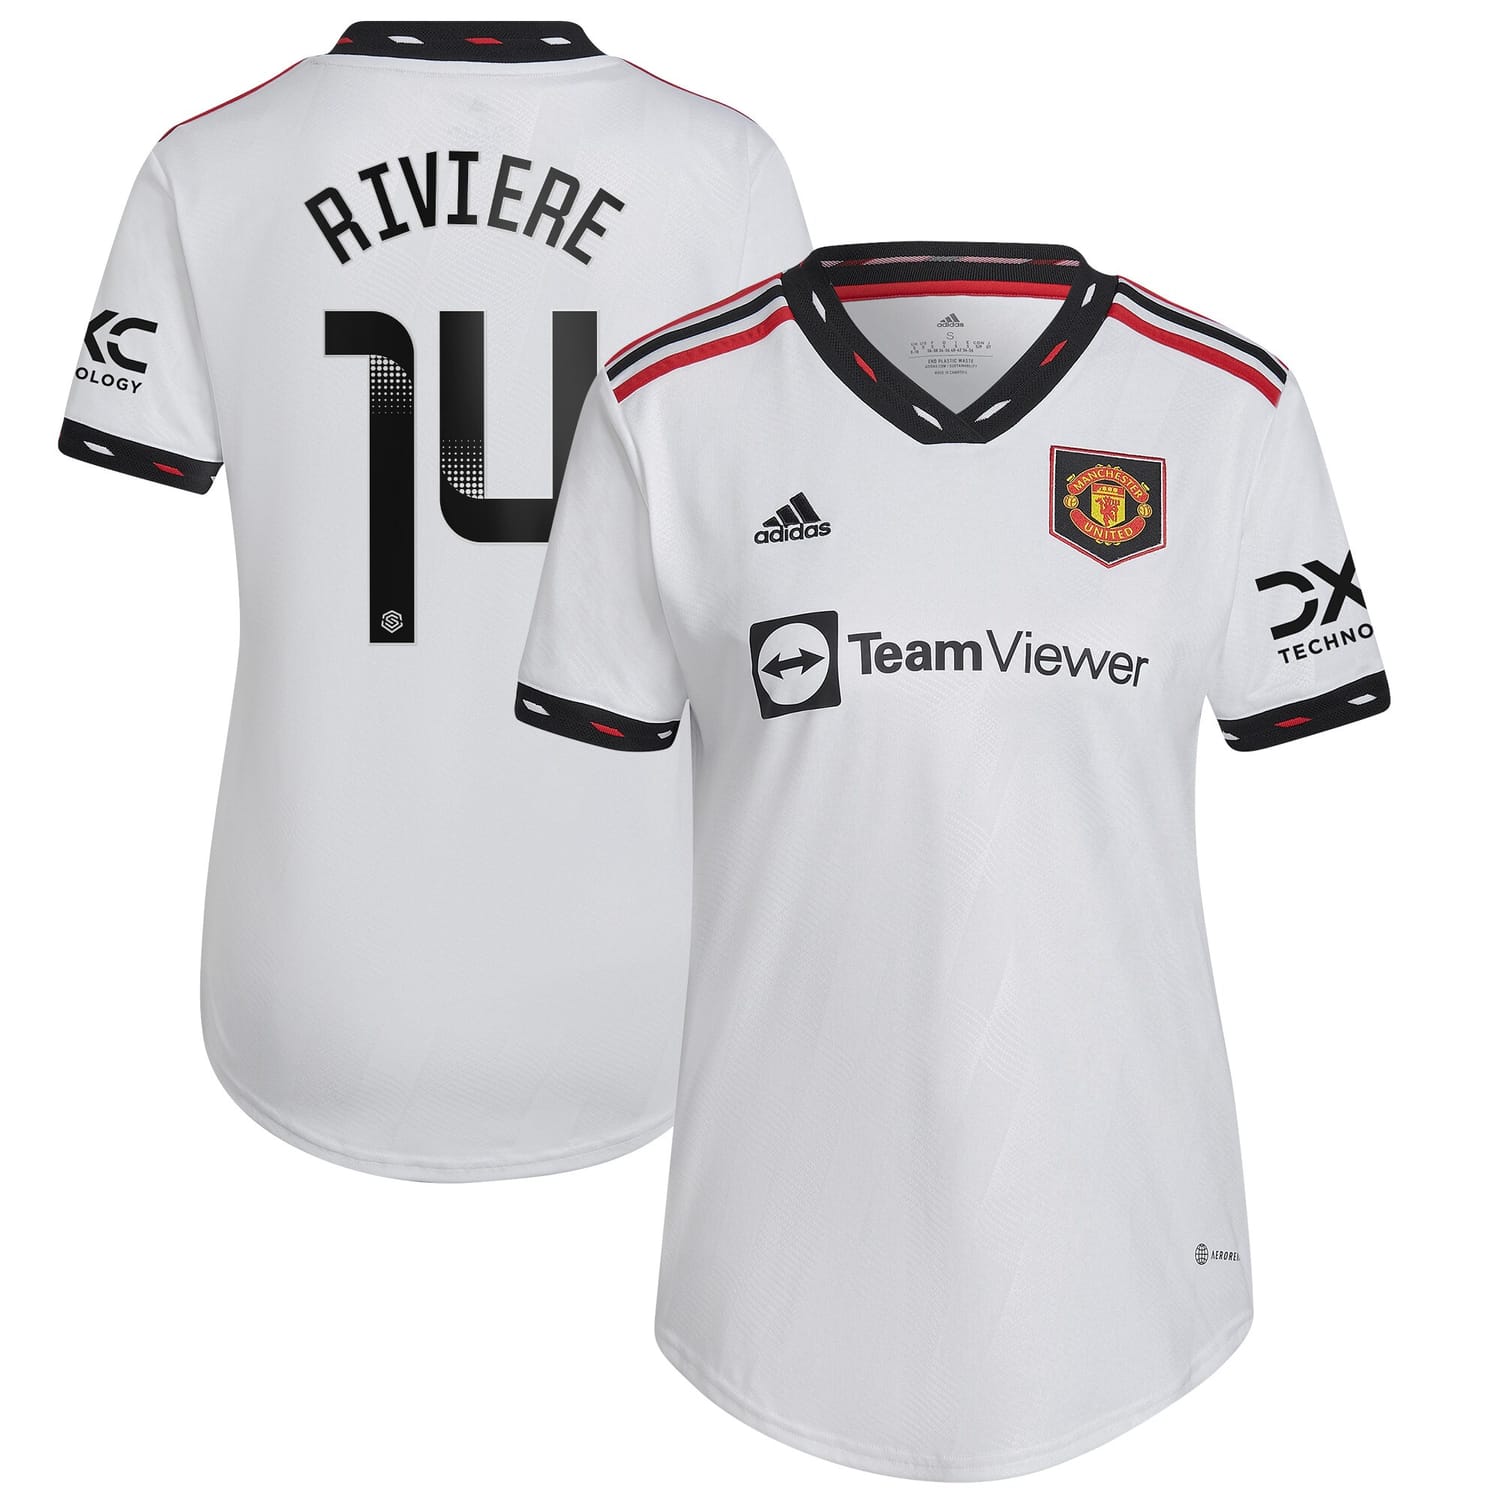 Premier League Manchester United Away WSL Jersey Shirt 2022-23 player Jayde Riviere 14 printing for Women